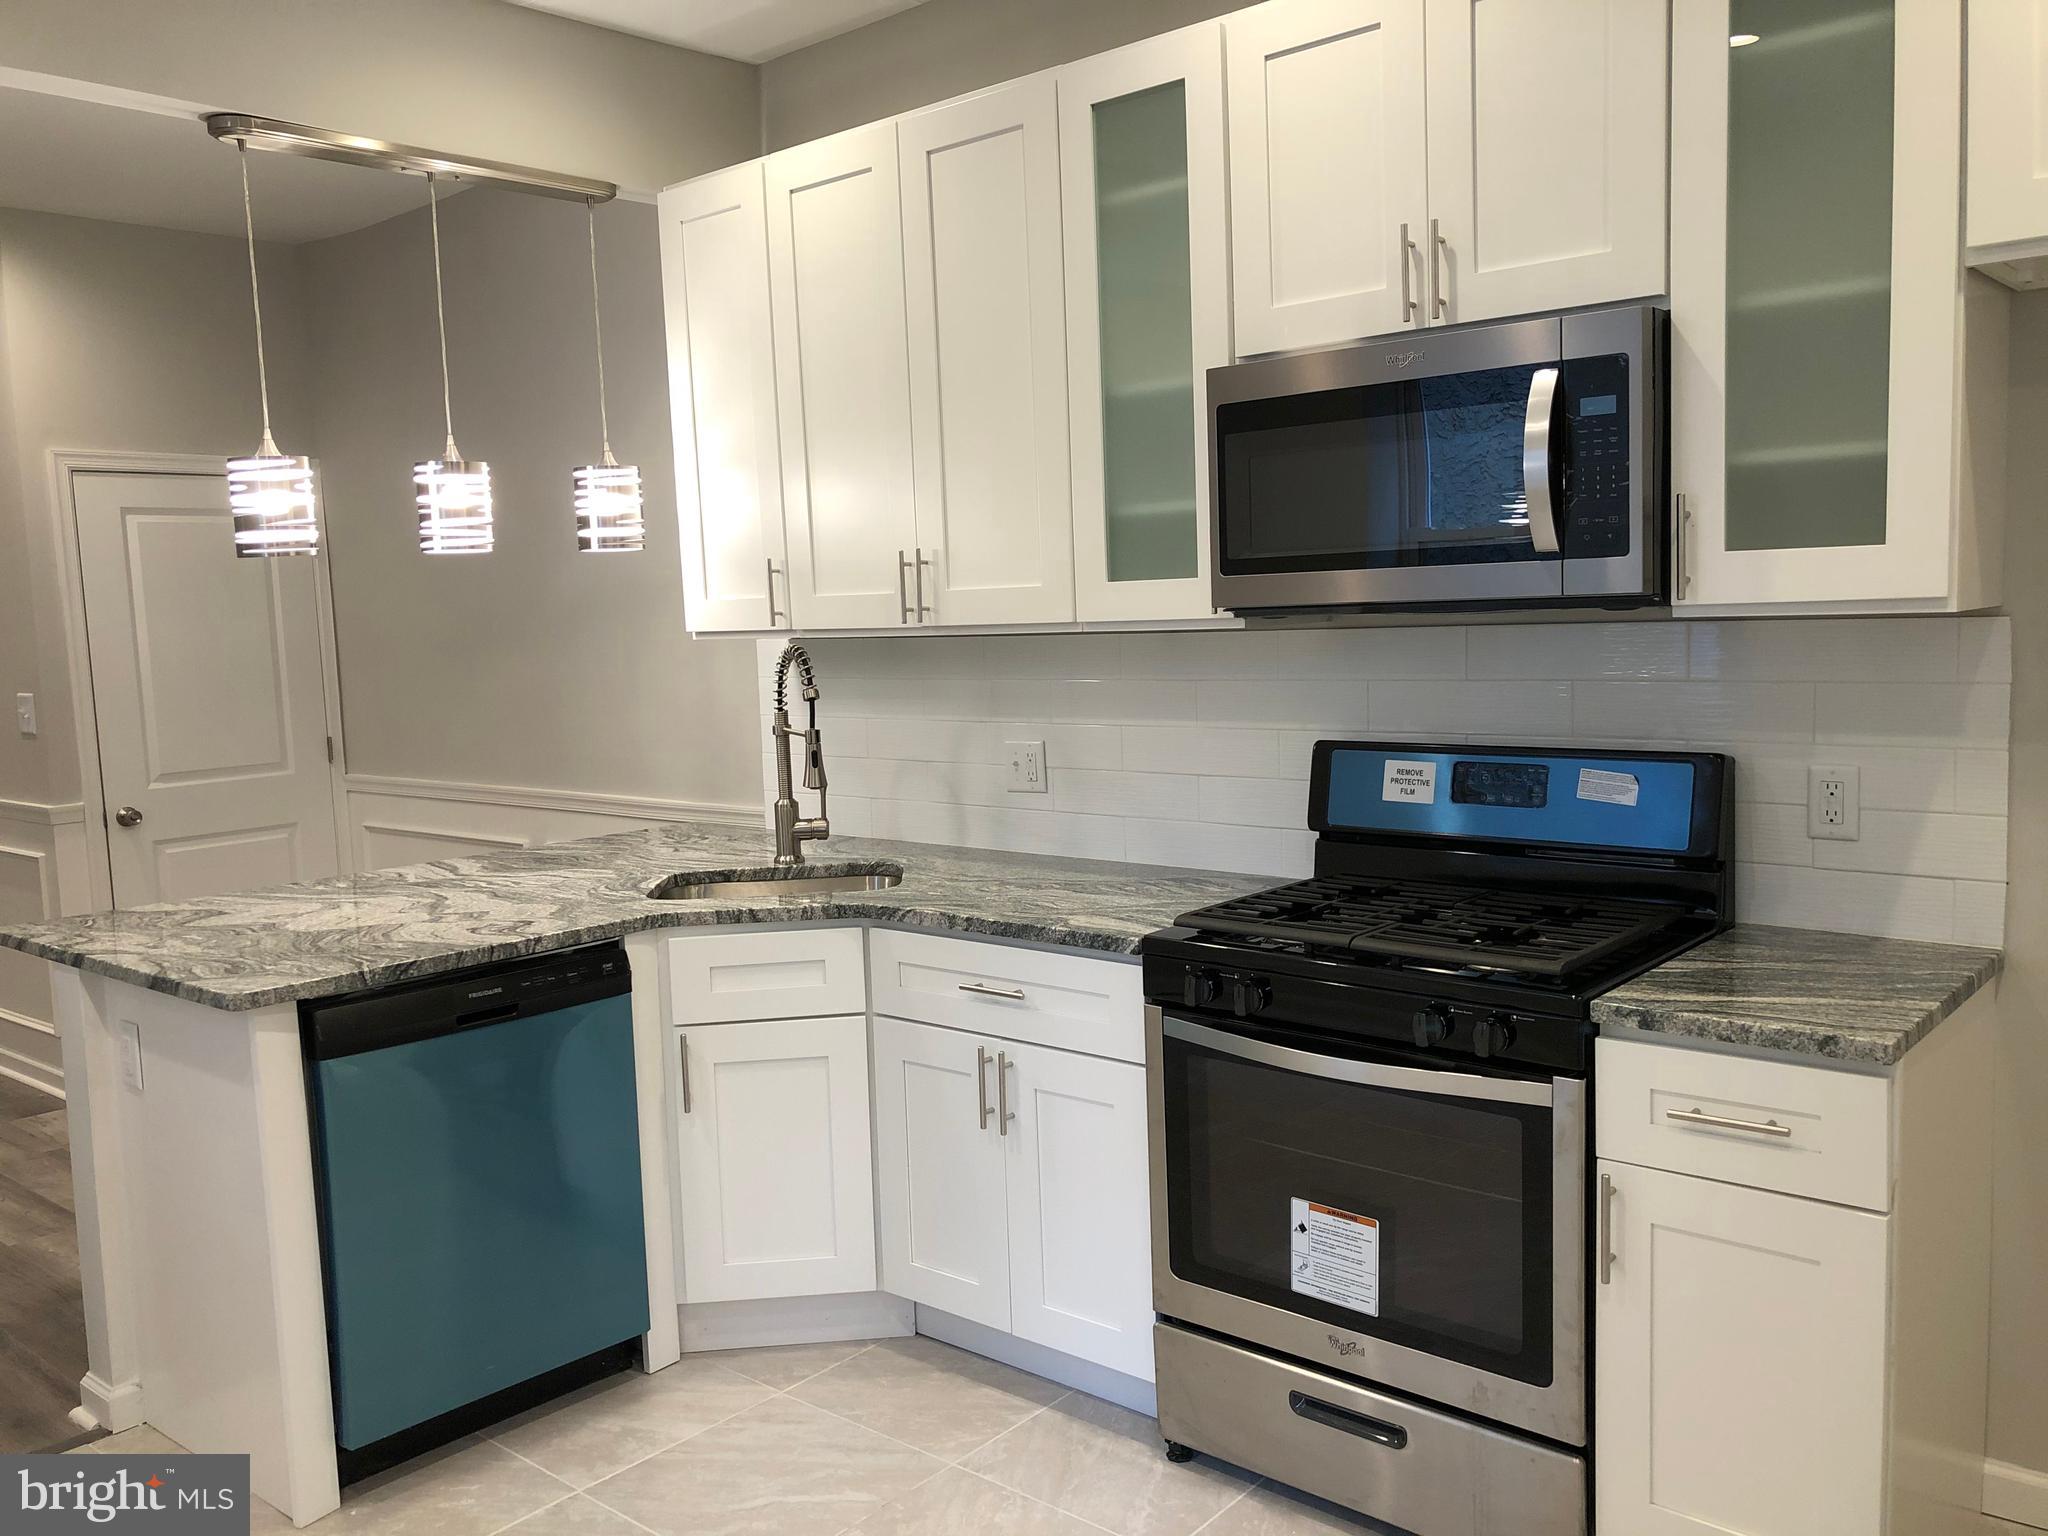 a kitchen with cabinets appliances and a sink